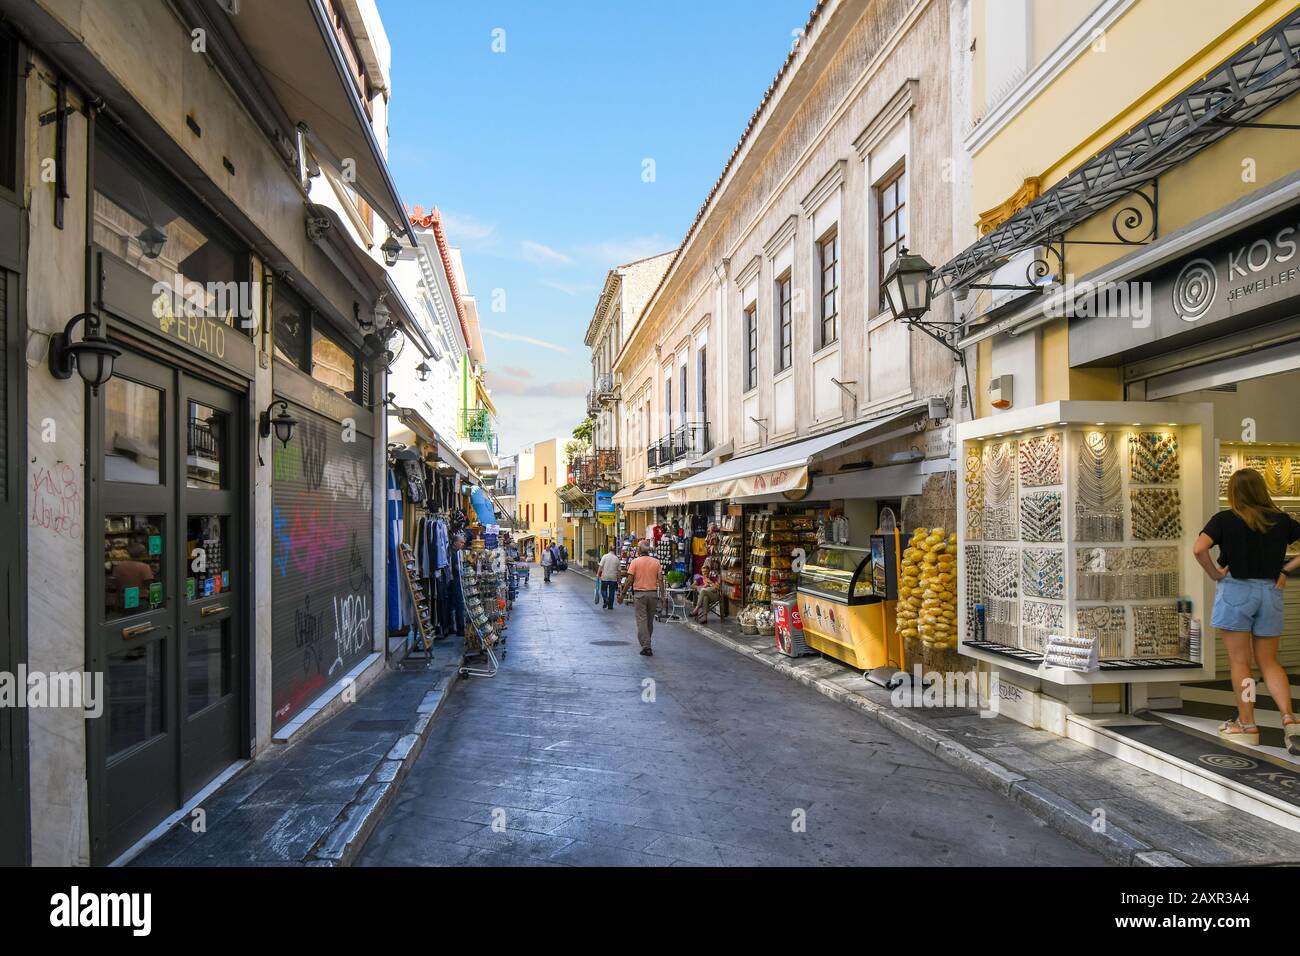 Merchants and workers open their shop businesses early in the morning before the tourist crowds in the Plaka area of Athens, Greece. Stock Photo